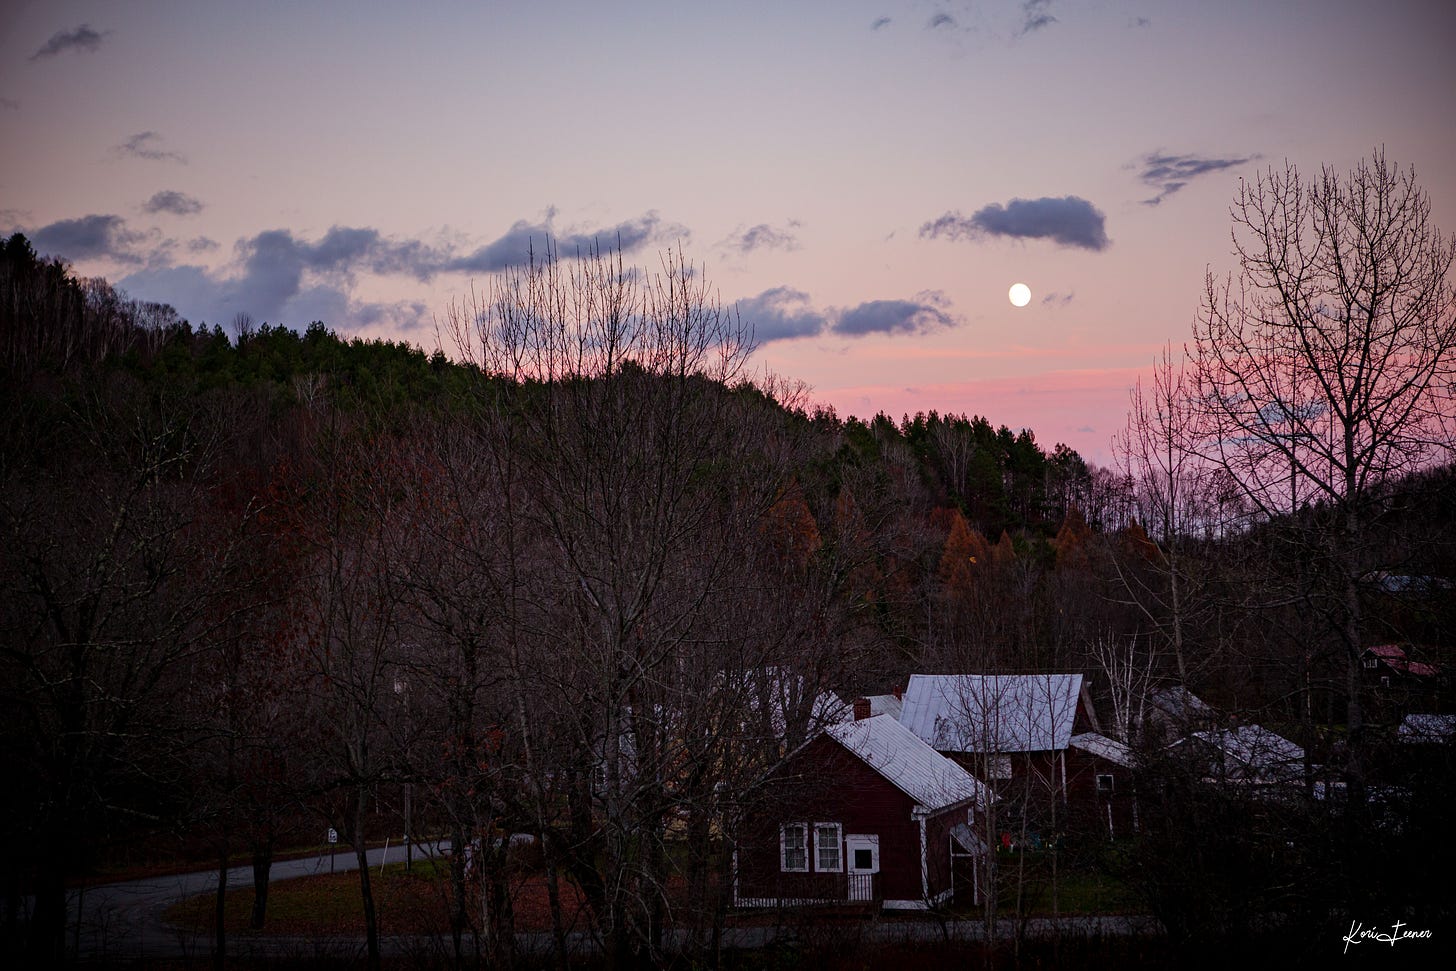 Moonrise over a rural village in Vermont. Sky is filled with pinks and blues and the trees have lost all their leaves. A schoolhouse sits in the foreground.